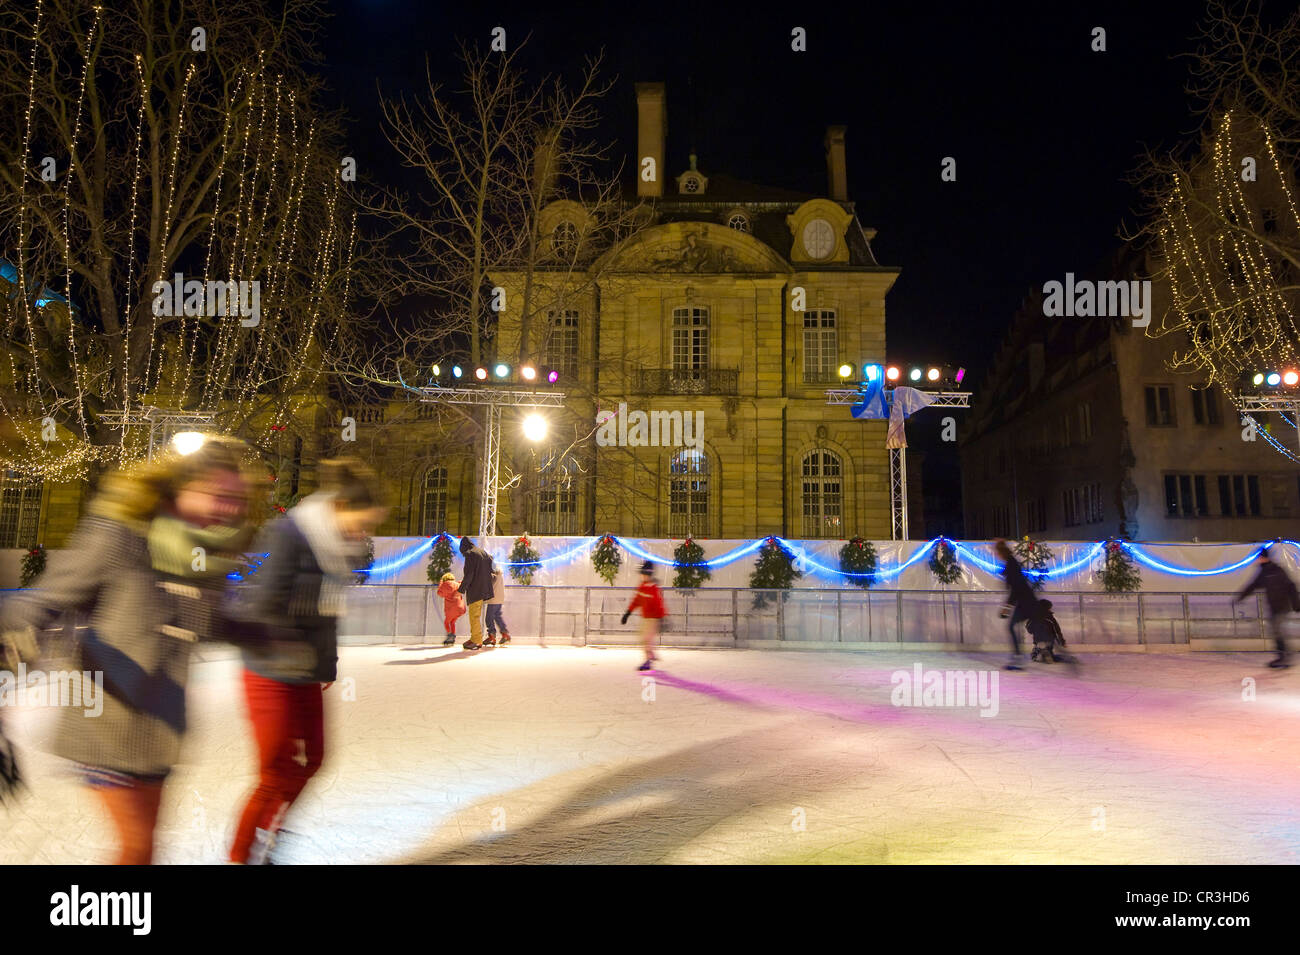 Patinoire, Strasbourg, Alsace, France, Europe Banque D'Images